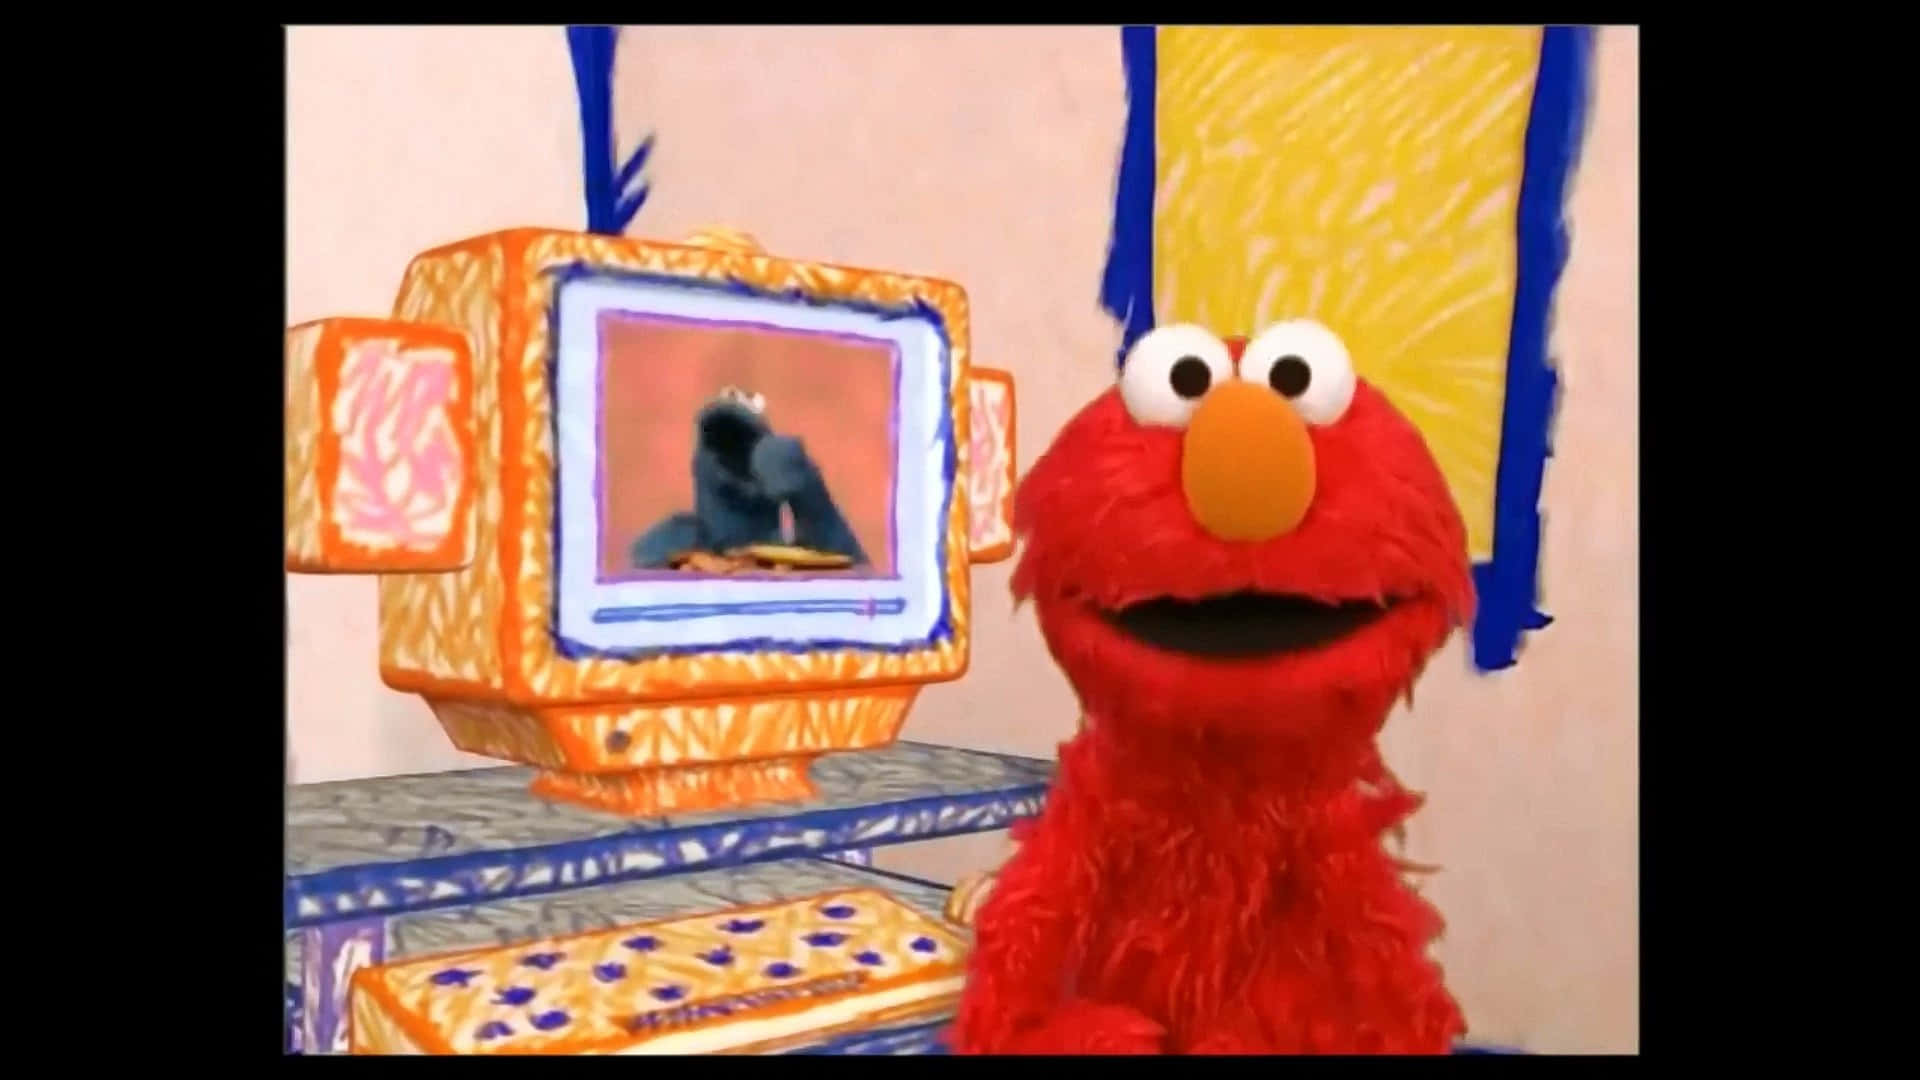 Join in the Fun at Elmo's World!